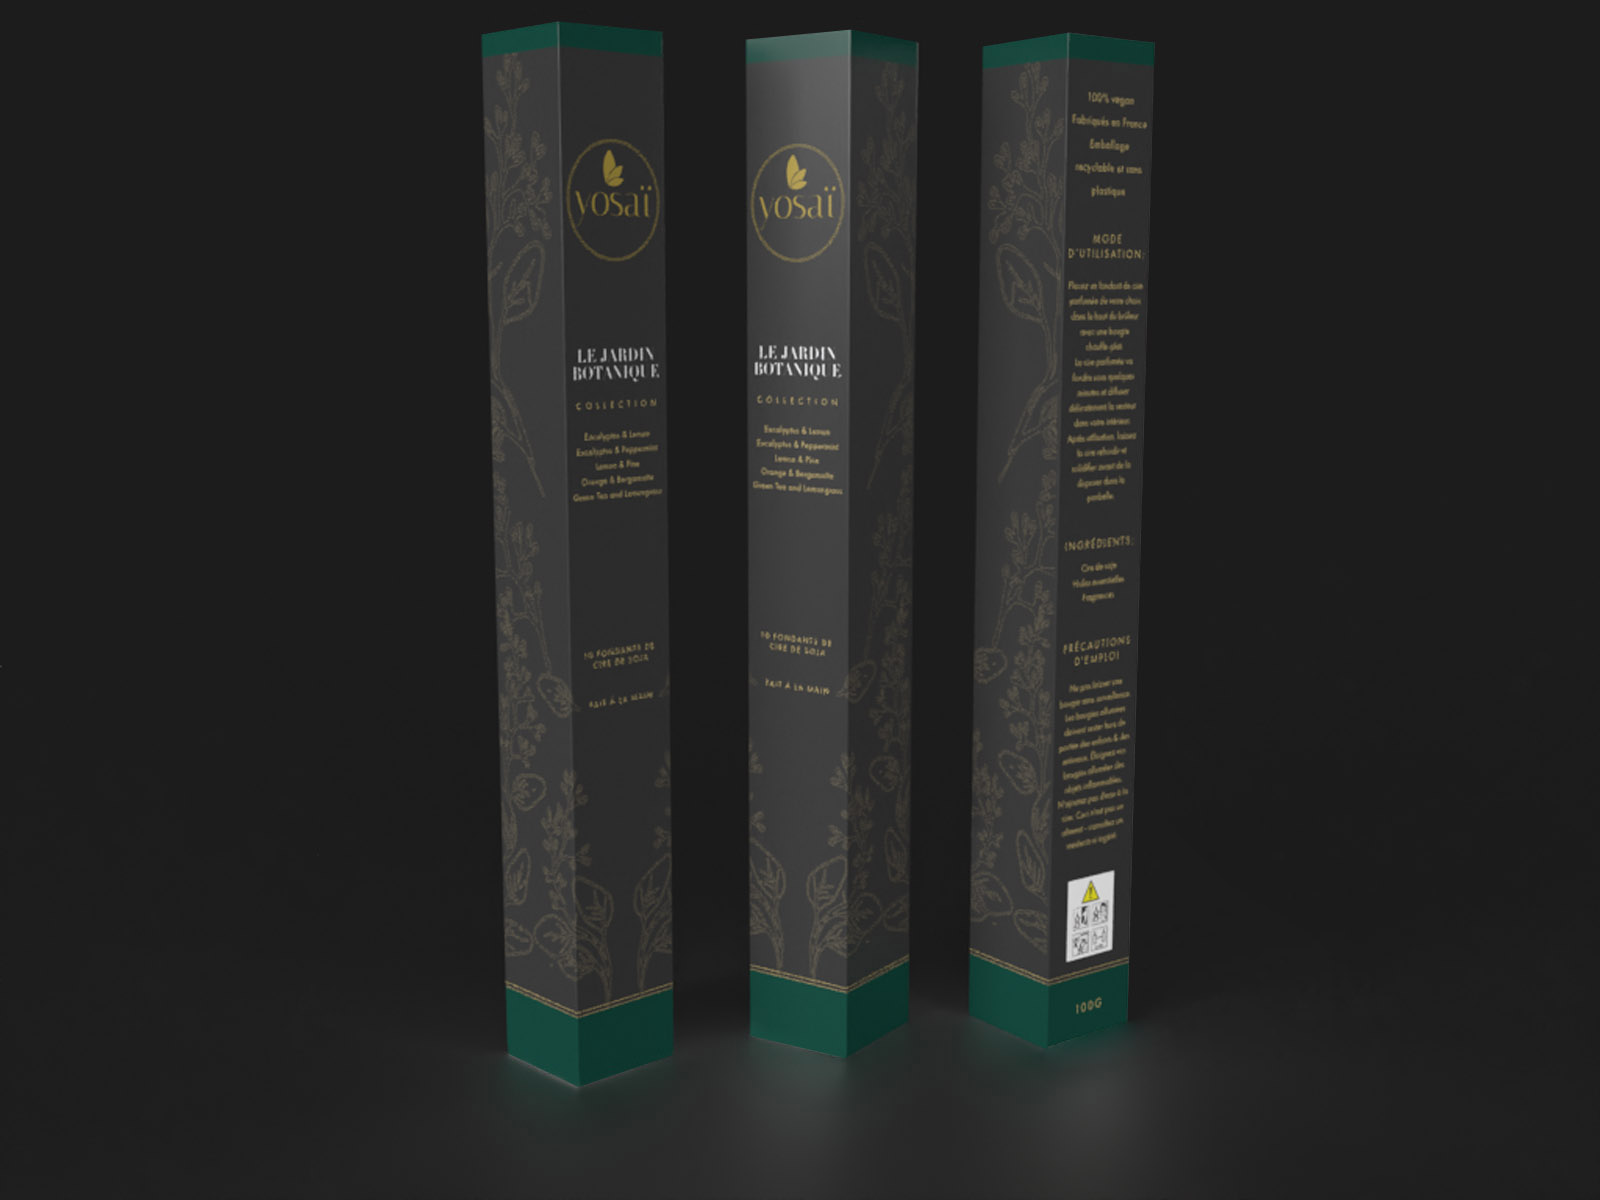 Yosai Luxury Candles Packaging Design Project